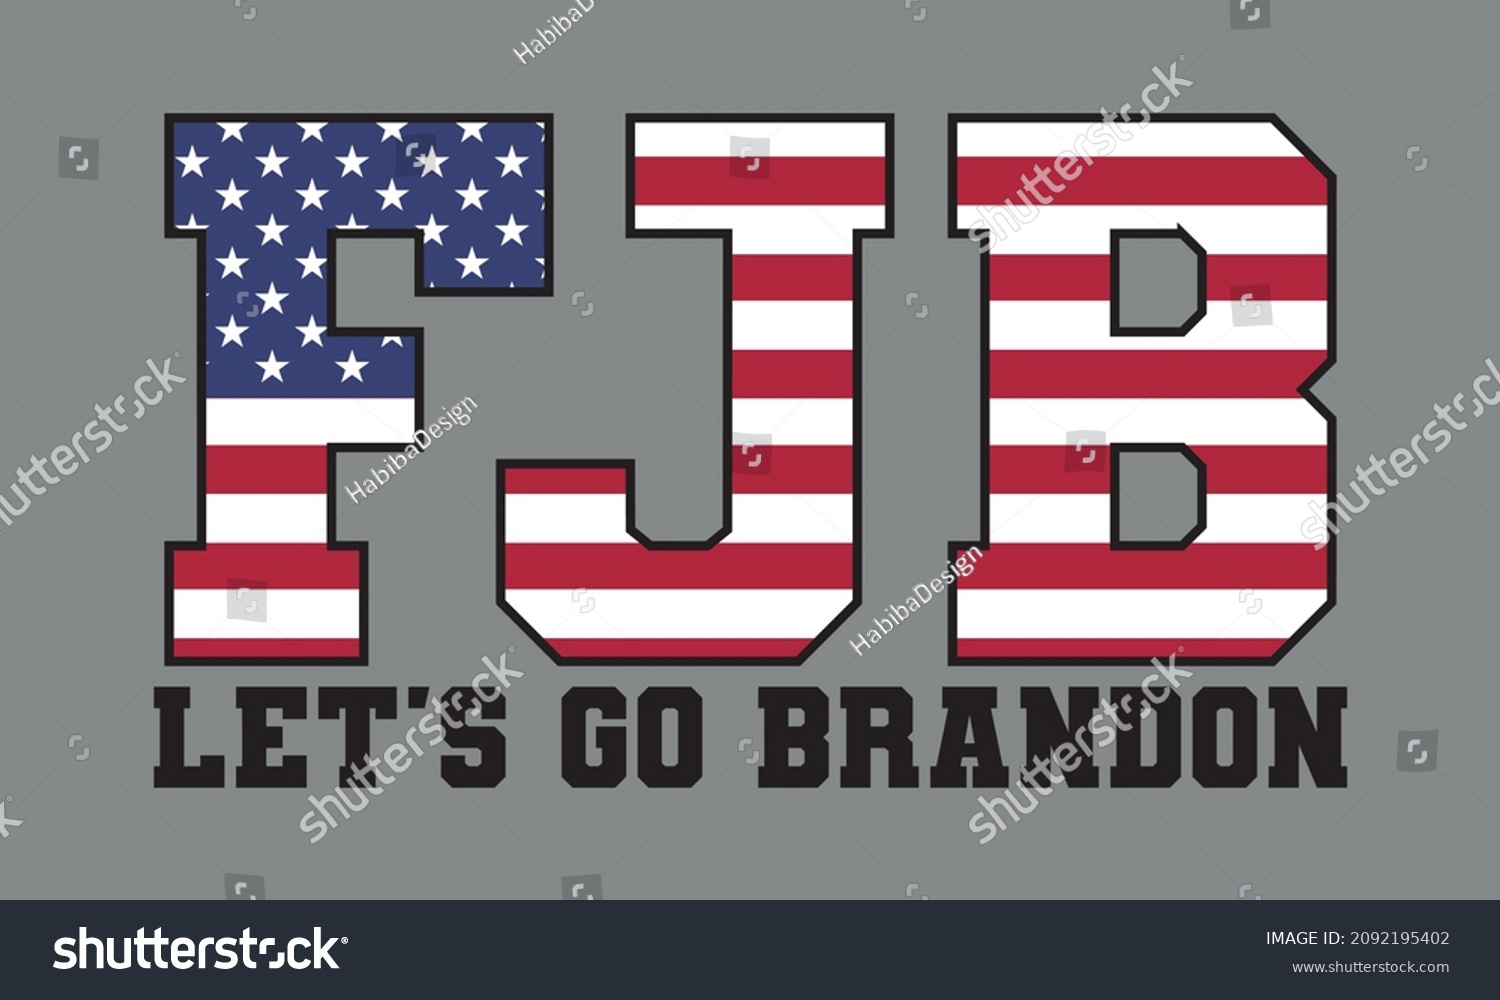 SVG of FJB - Let's Go Brandon, 4th July of USA, American flag Vector and Clip Art svg